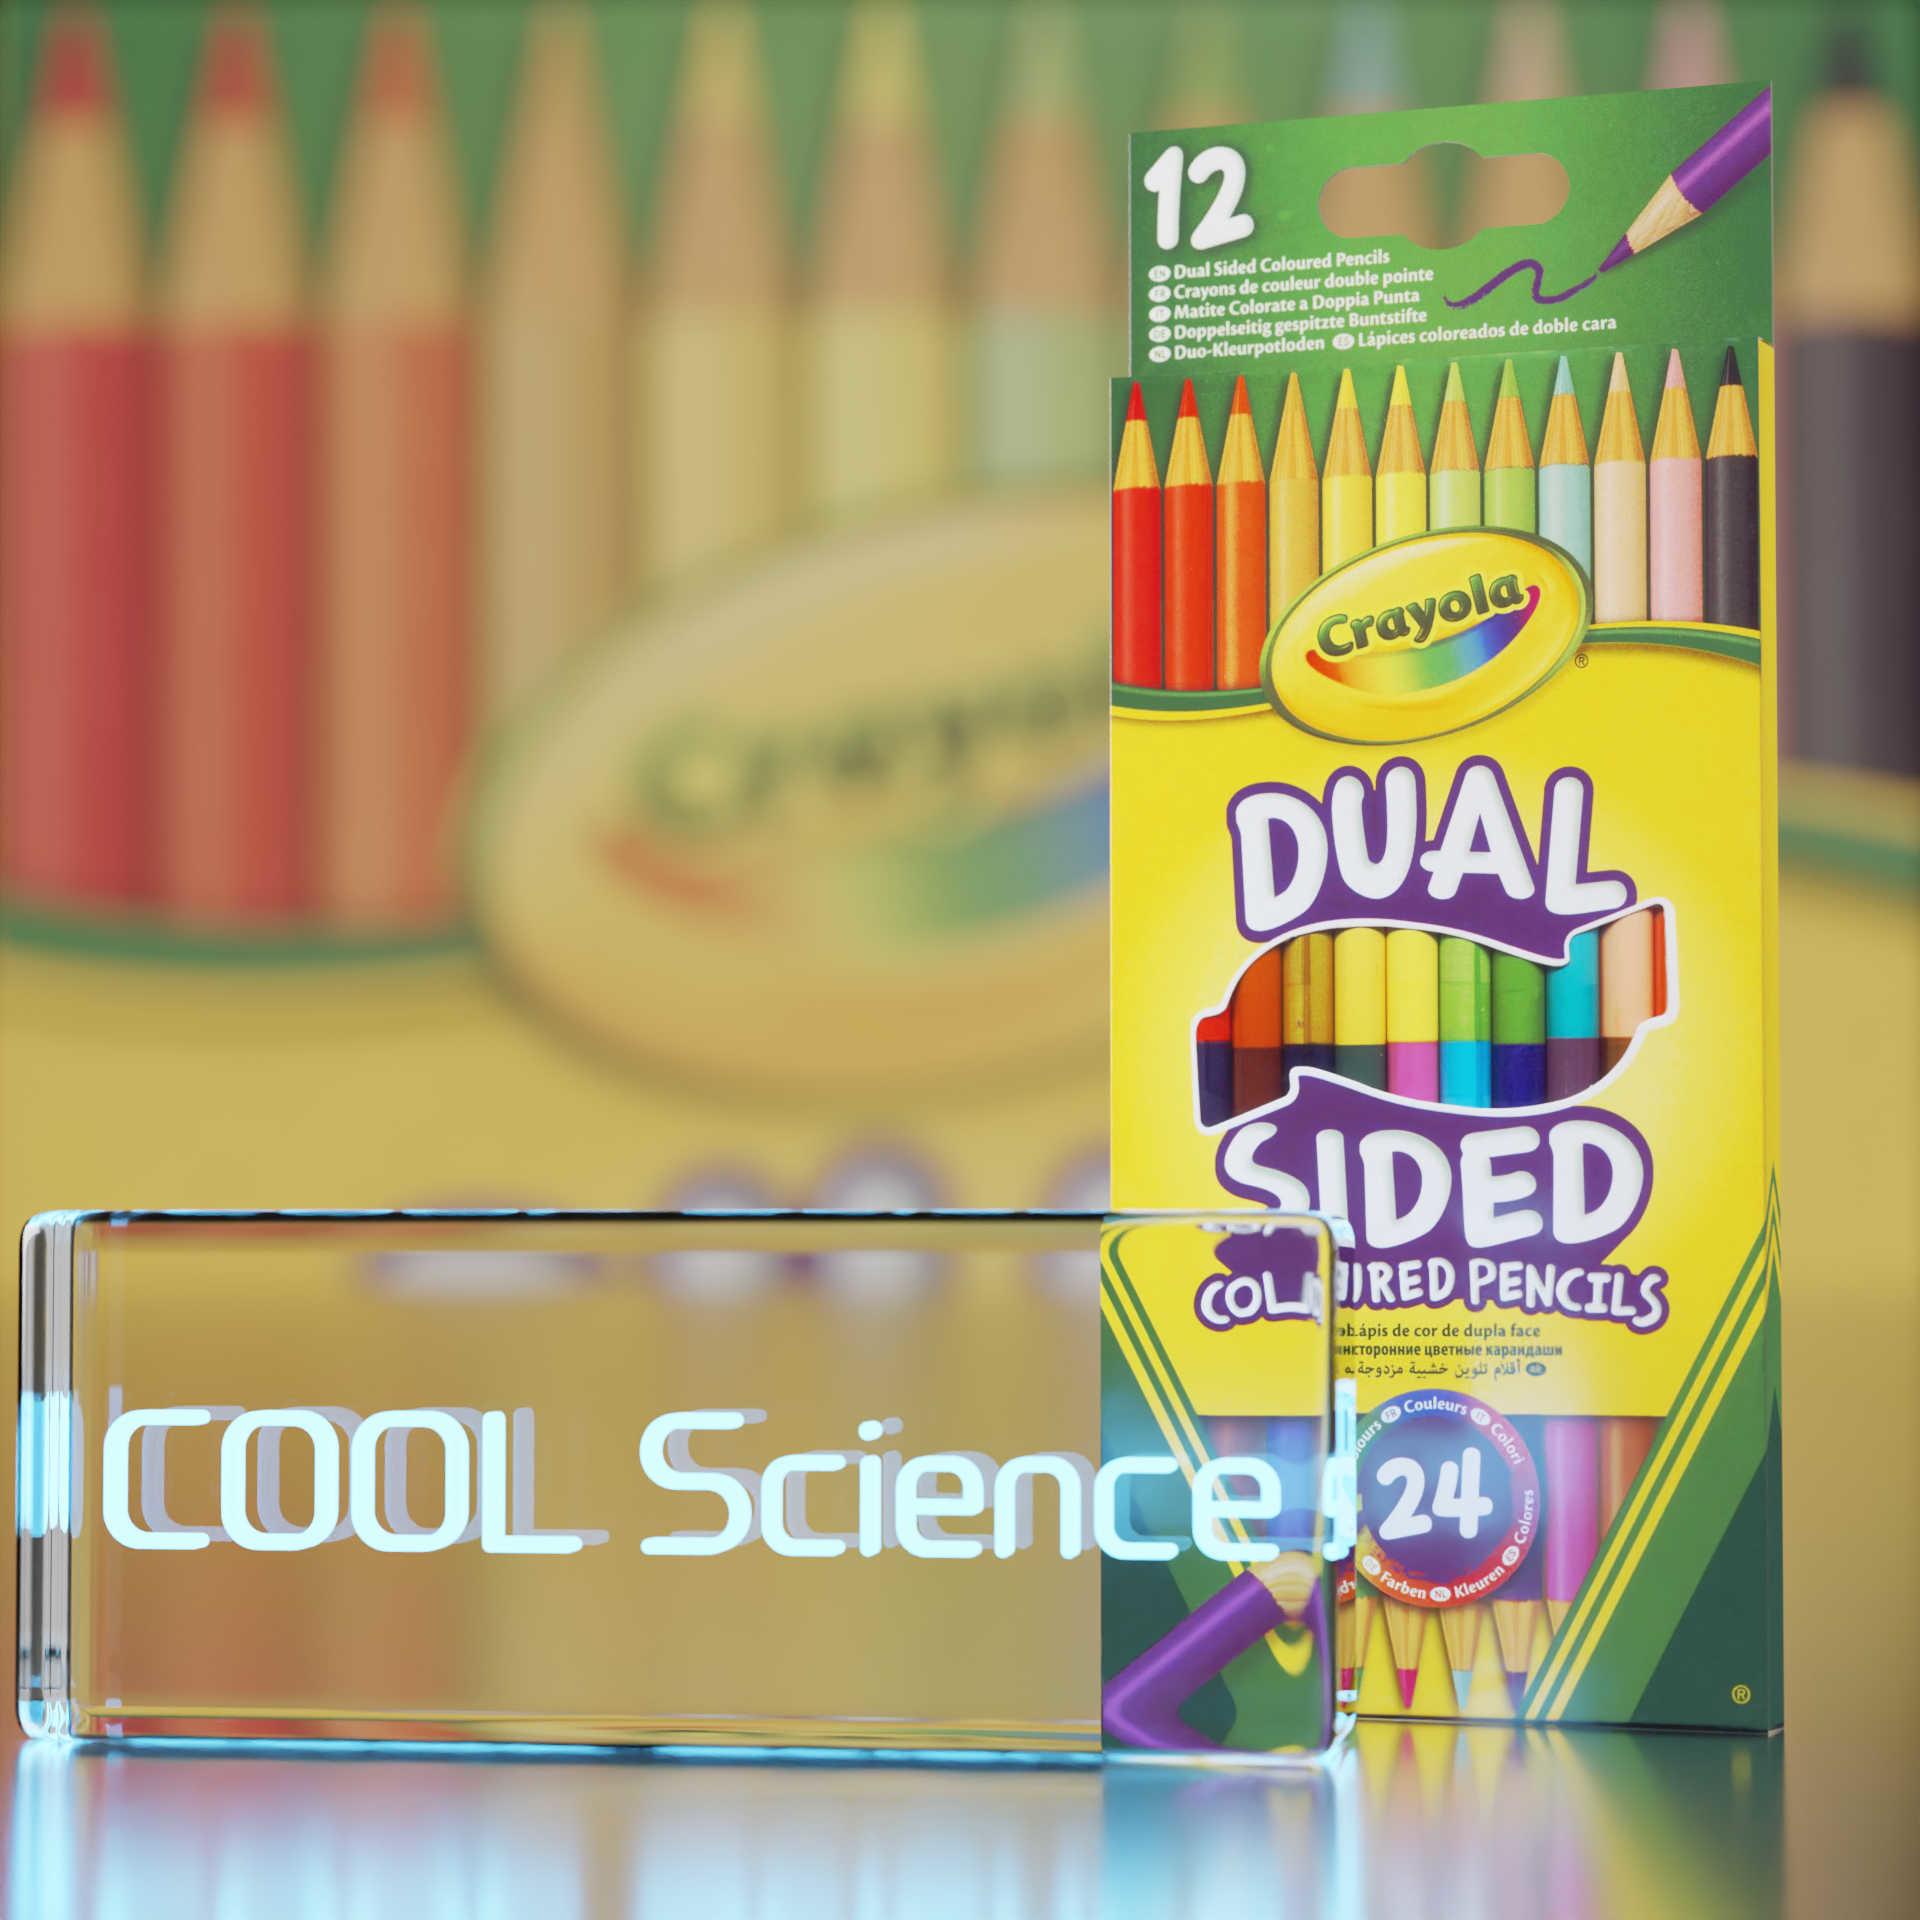 Front View of the Crayola 12 Dual Sided Coloured Pencils box